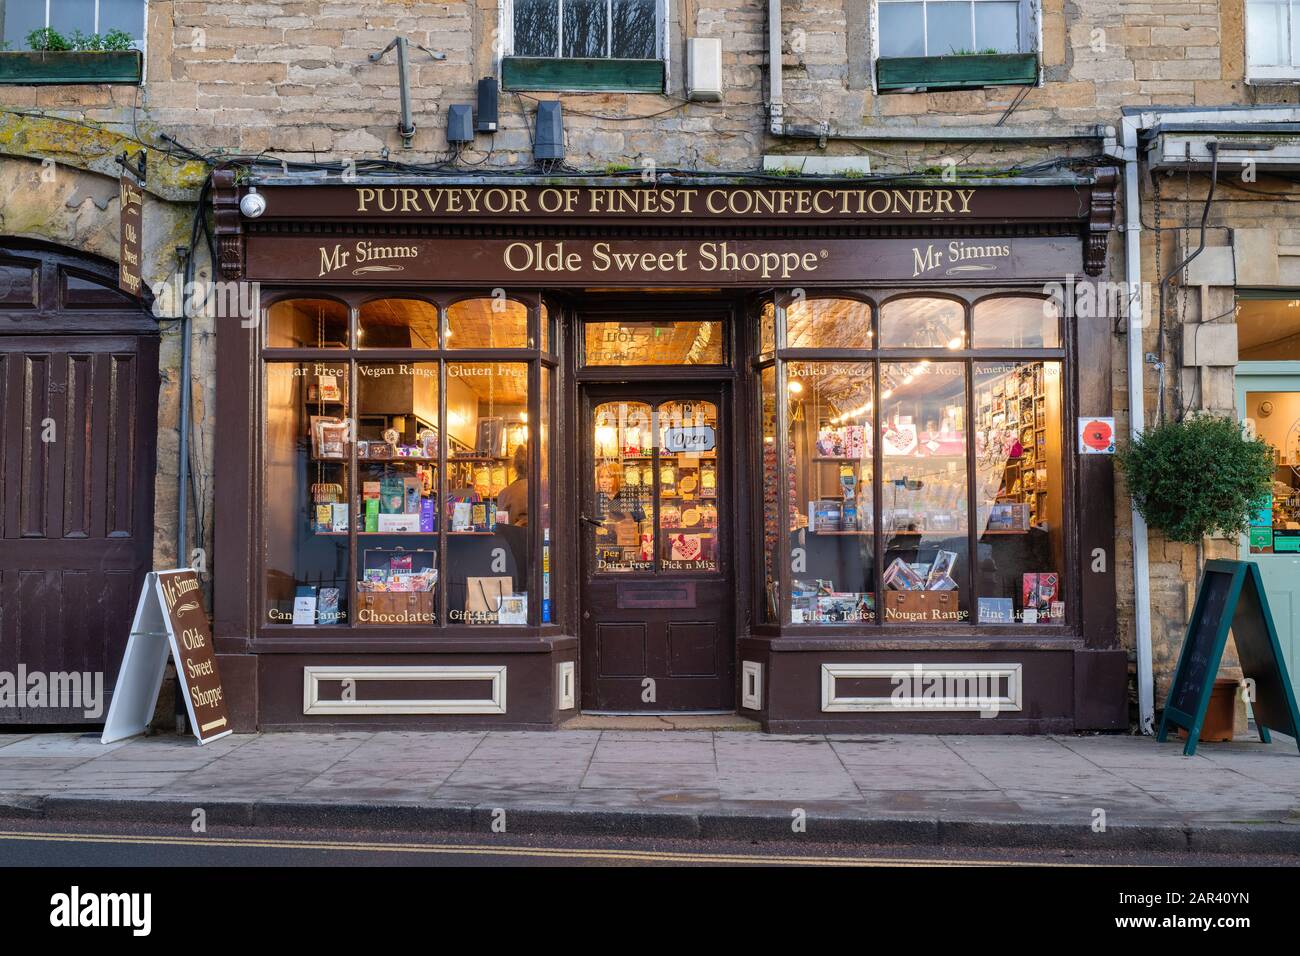 Herr Simms Olde Sweet Shoppe. Old Sweet Shop, Chipping Norton, Cotswolds, Oxfordshire, England Stockfoto